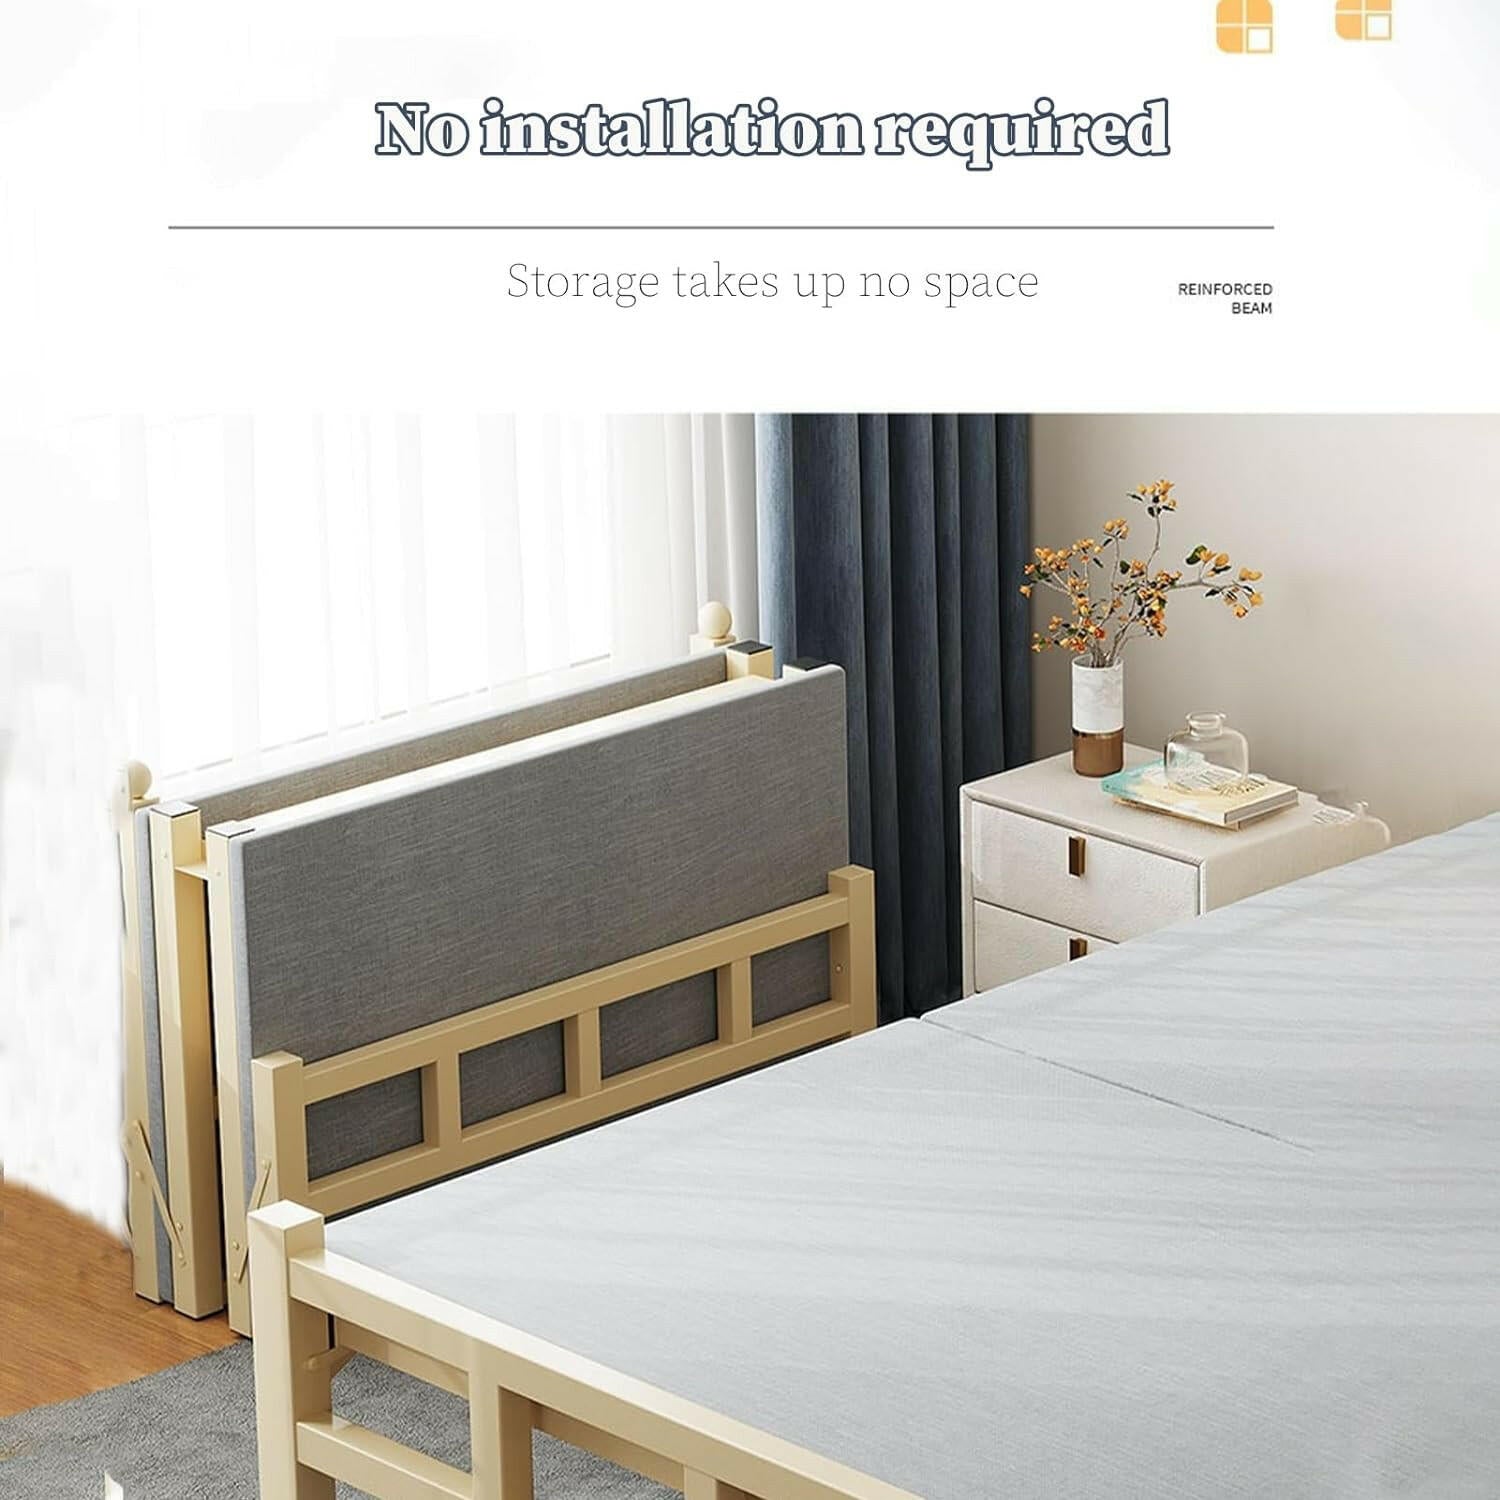 Metal bed frame / mattress base with steel support / no box spring needed / easy to assemble, single